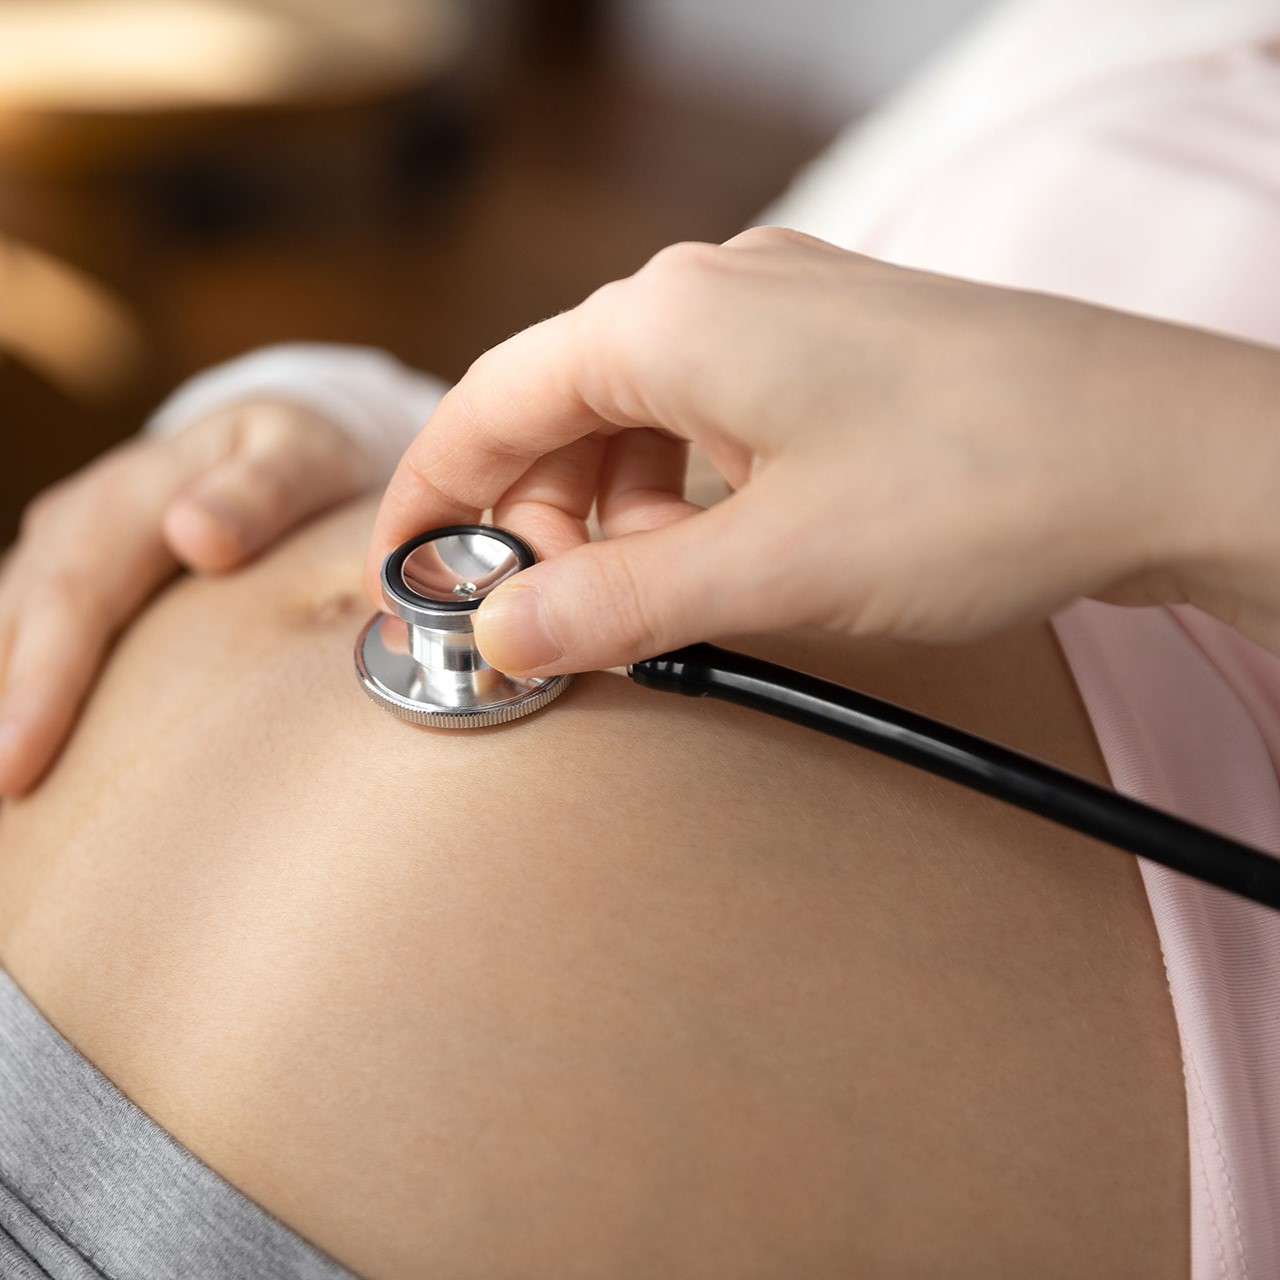 OBGYN doctor using stethoscope on pregnant woman stomach to listen to heartbeat of baby